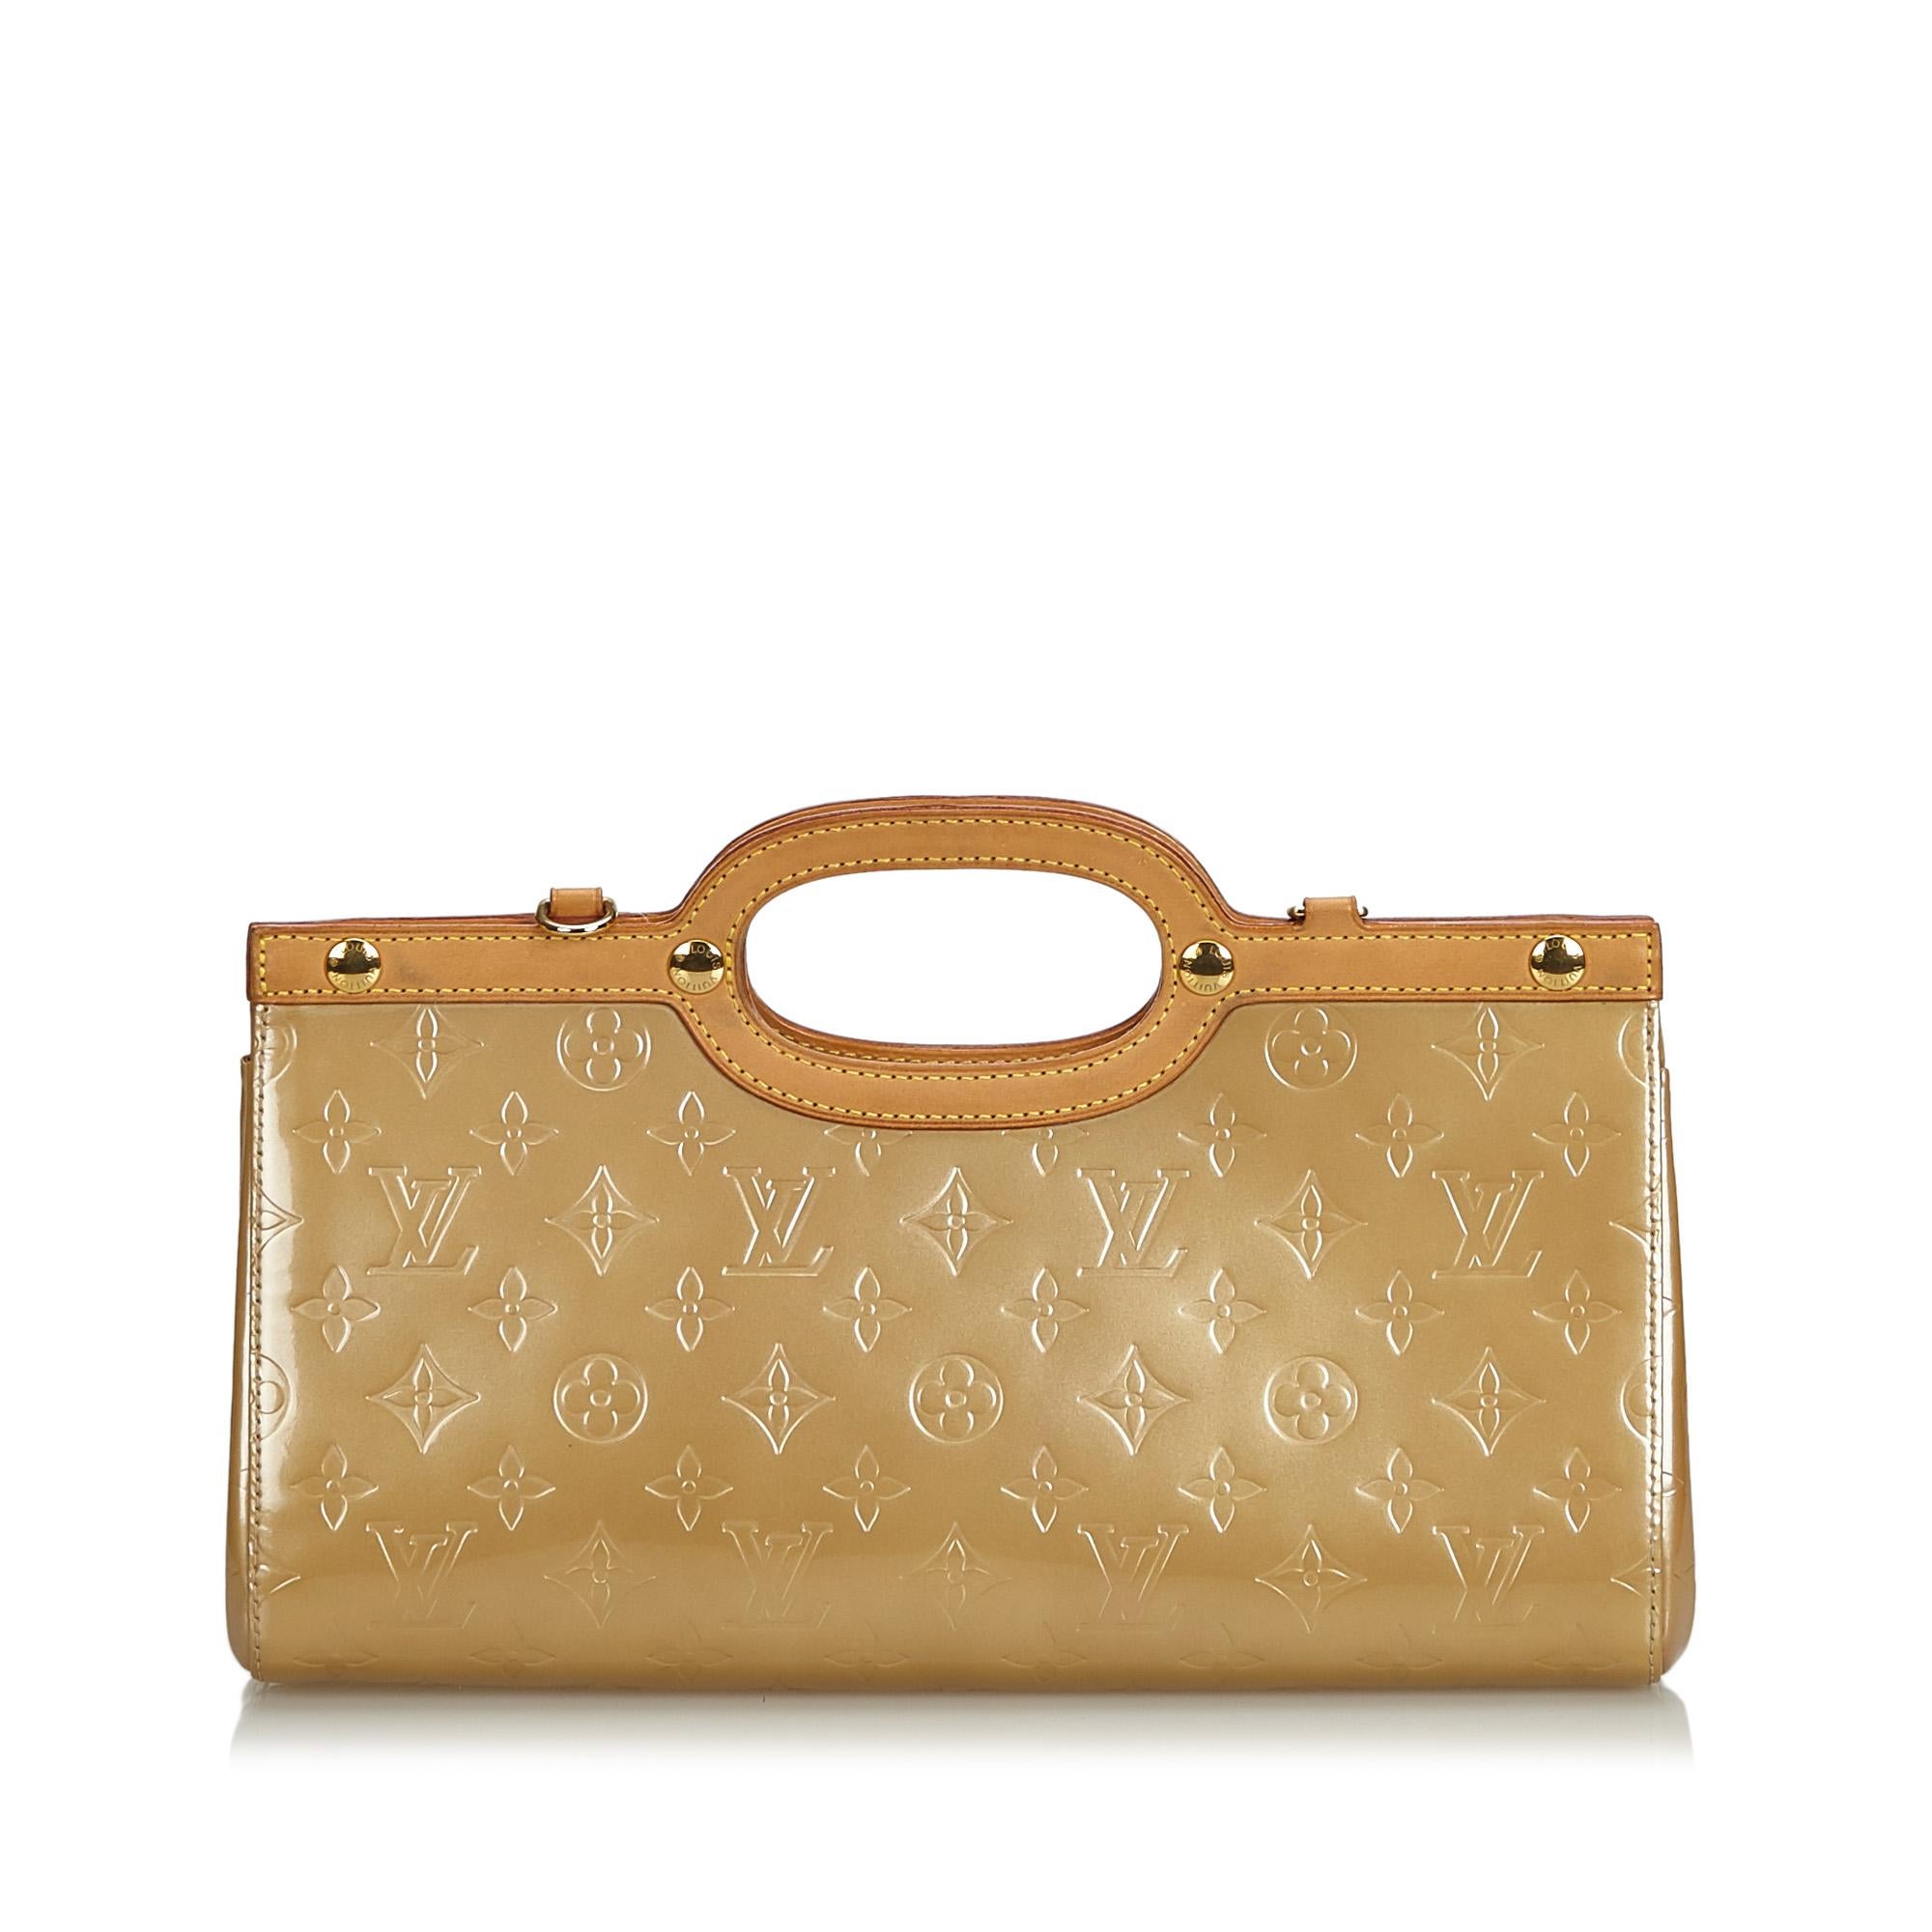 Louis Vuitton Brown Beige Vernis Leather Leather Vernis Roxbury Drive Spain In Good Condition For Sale In Orlando, FL